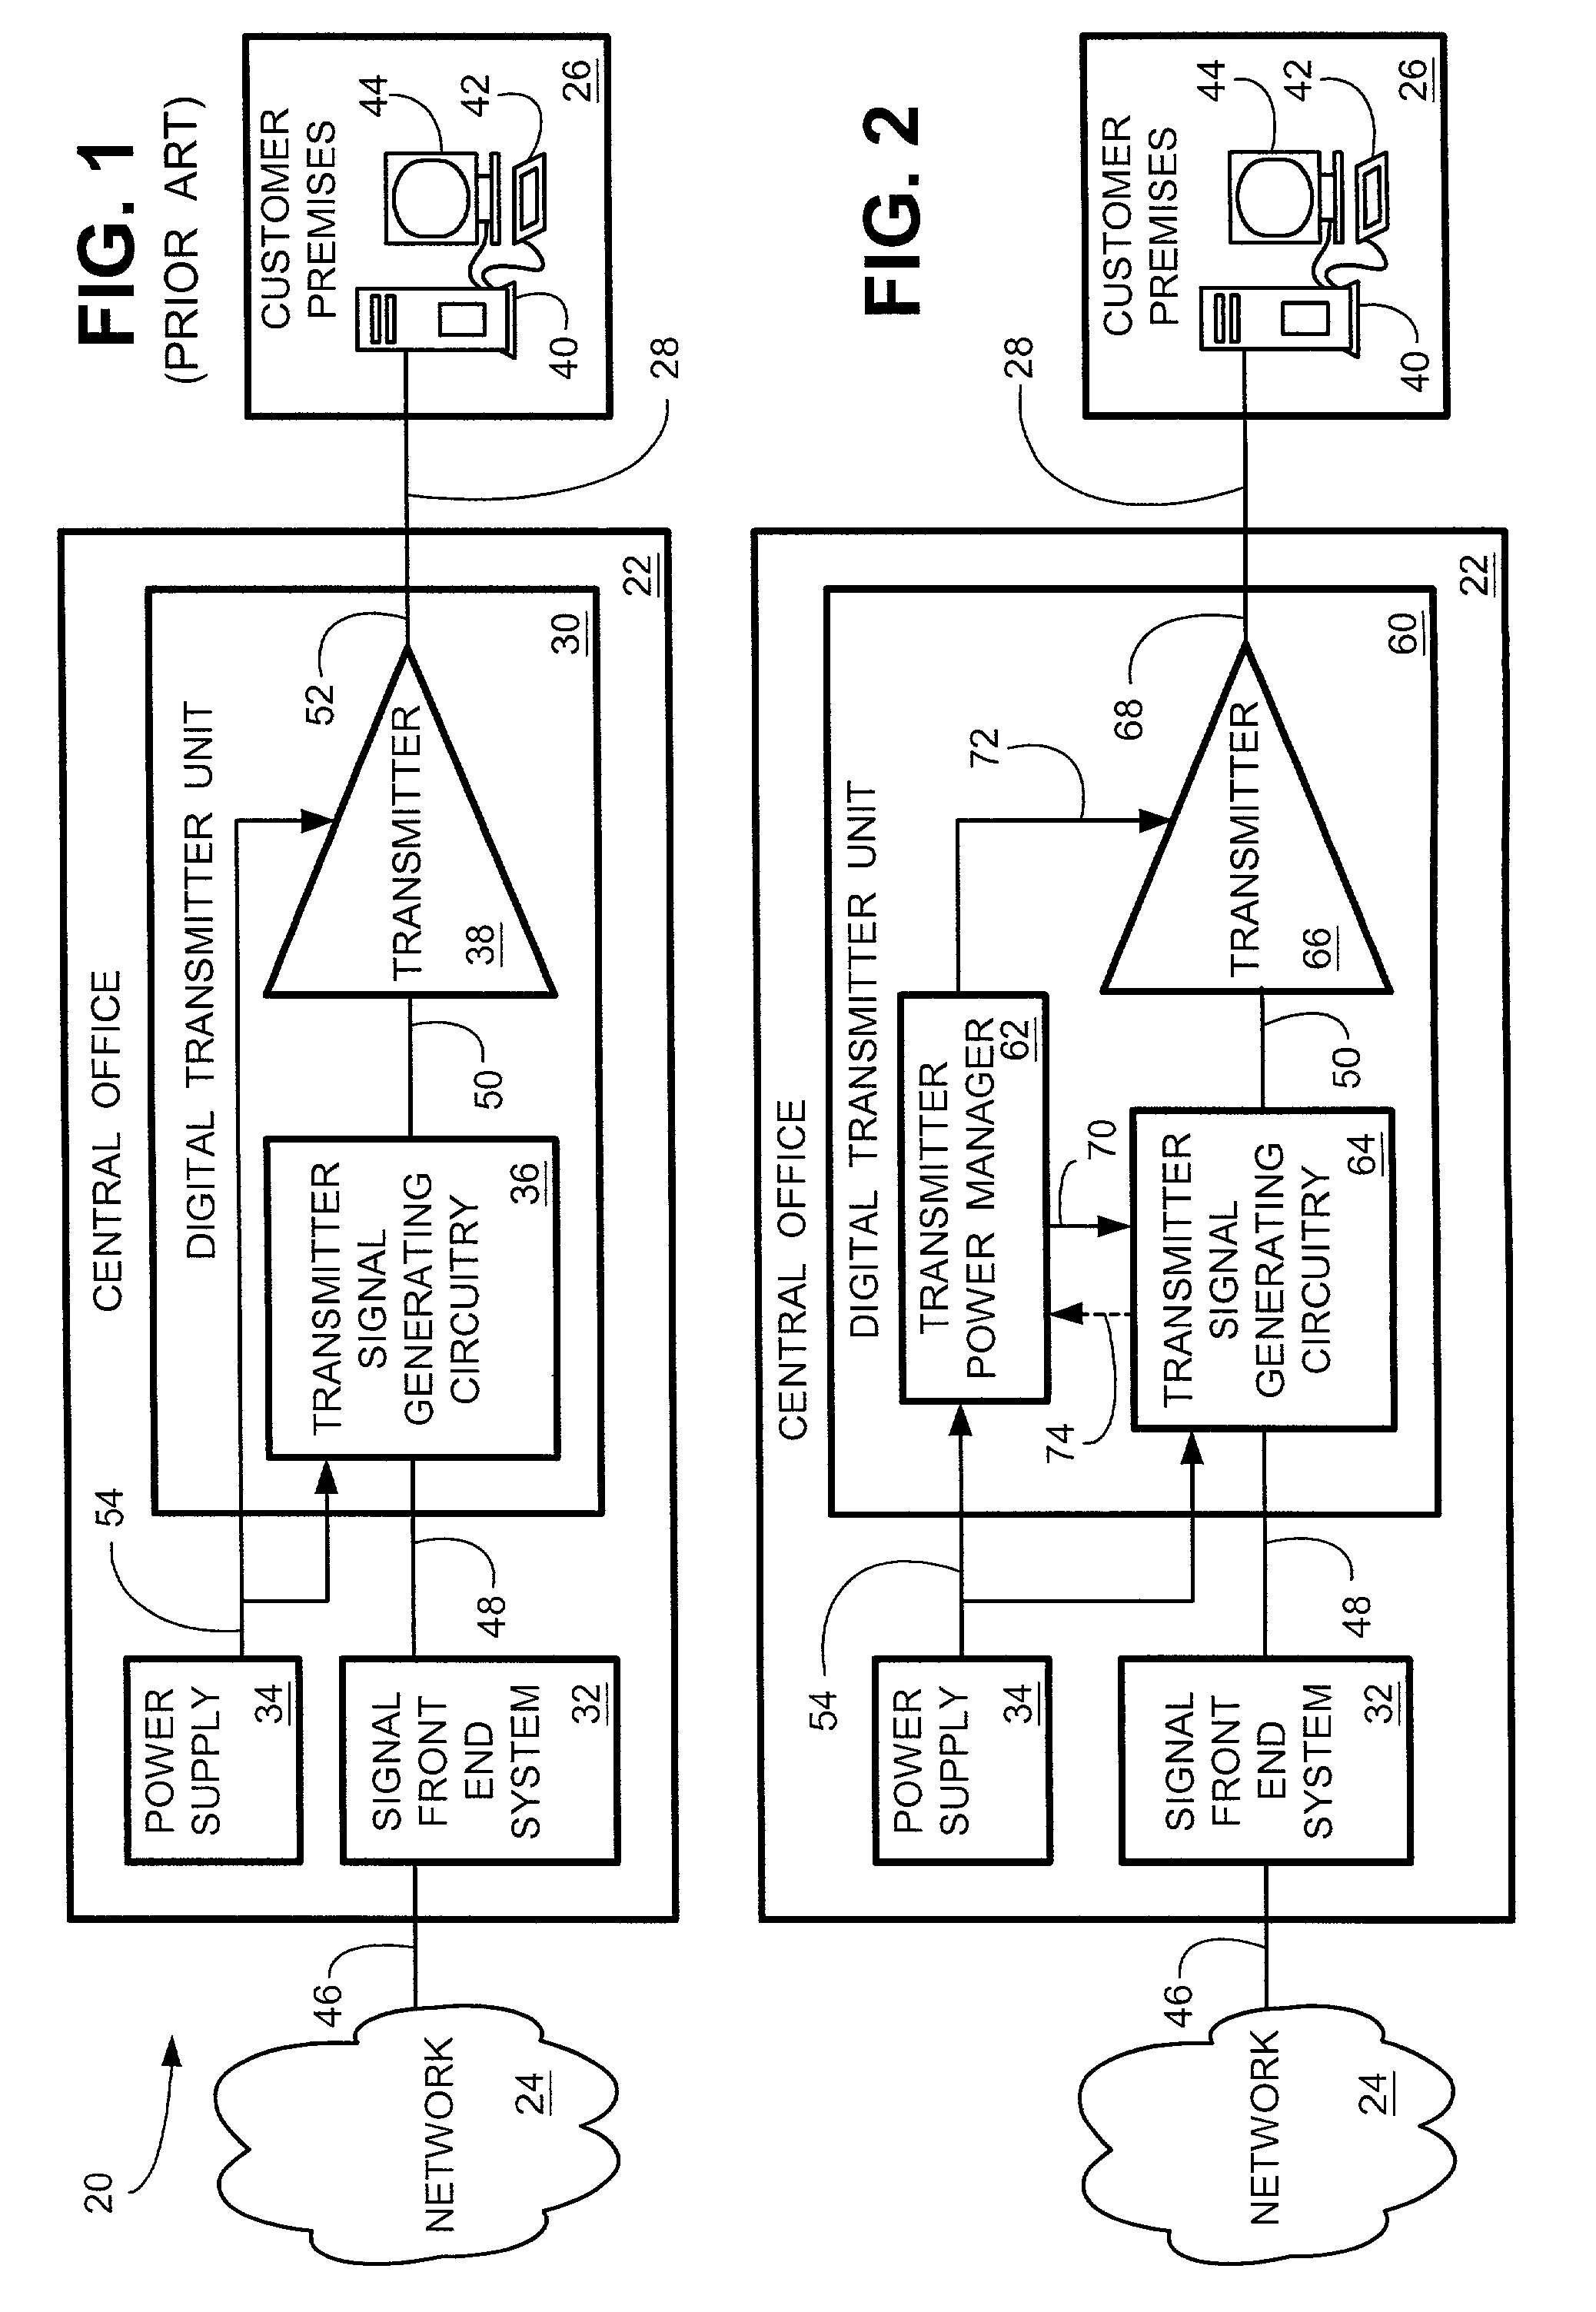 System and method for minimized power consumption for frame and cell data transmission systems